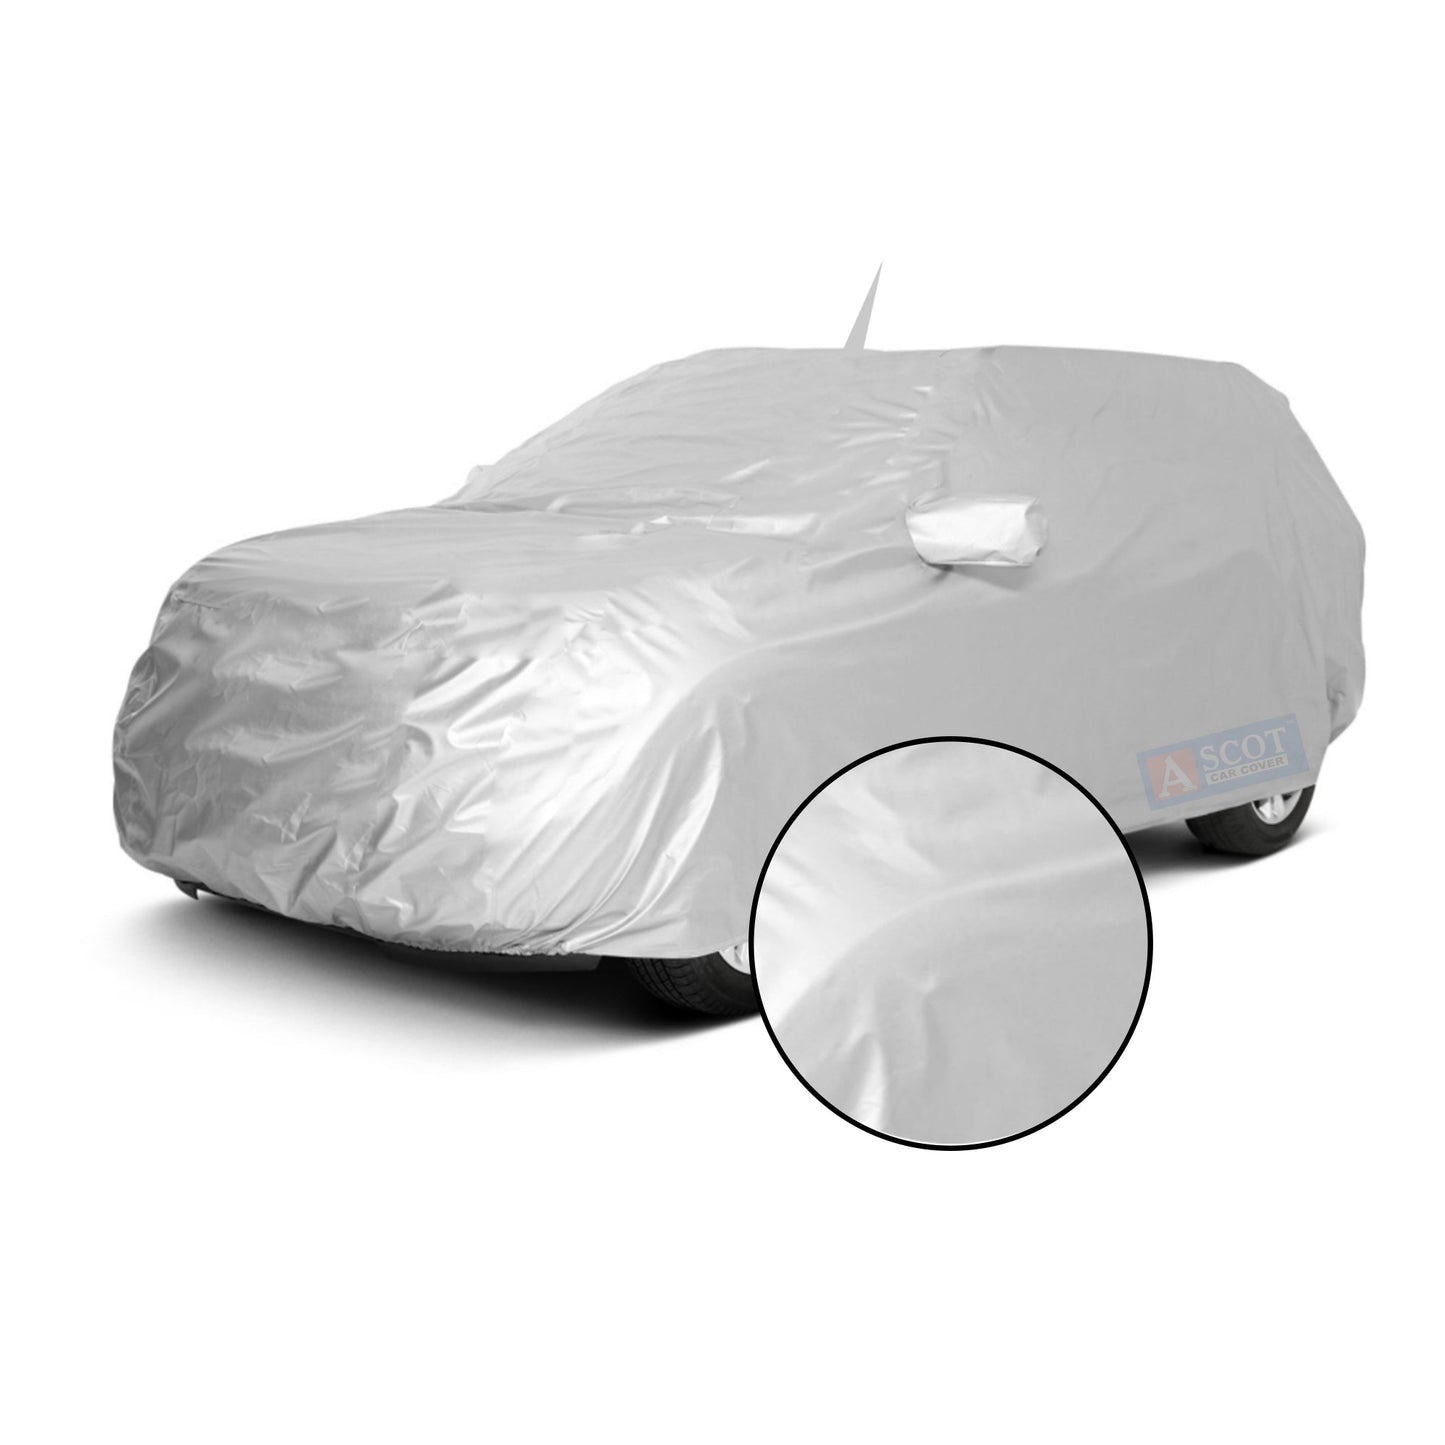 Ascot Tata Harrier / Harrier Facelift Car Body Cover Dust Proof, Trippel Stitched